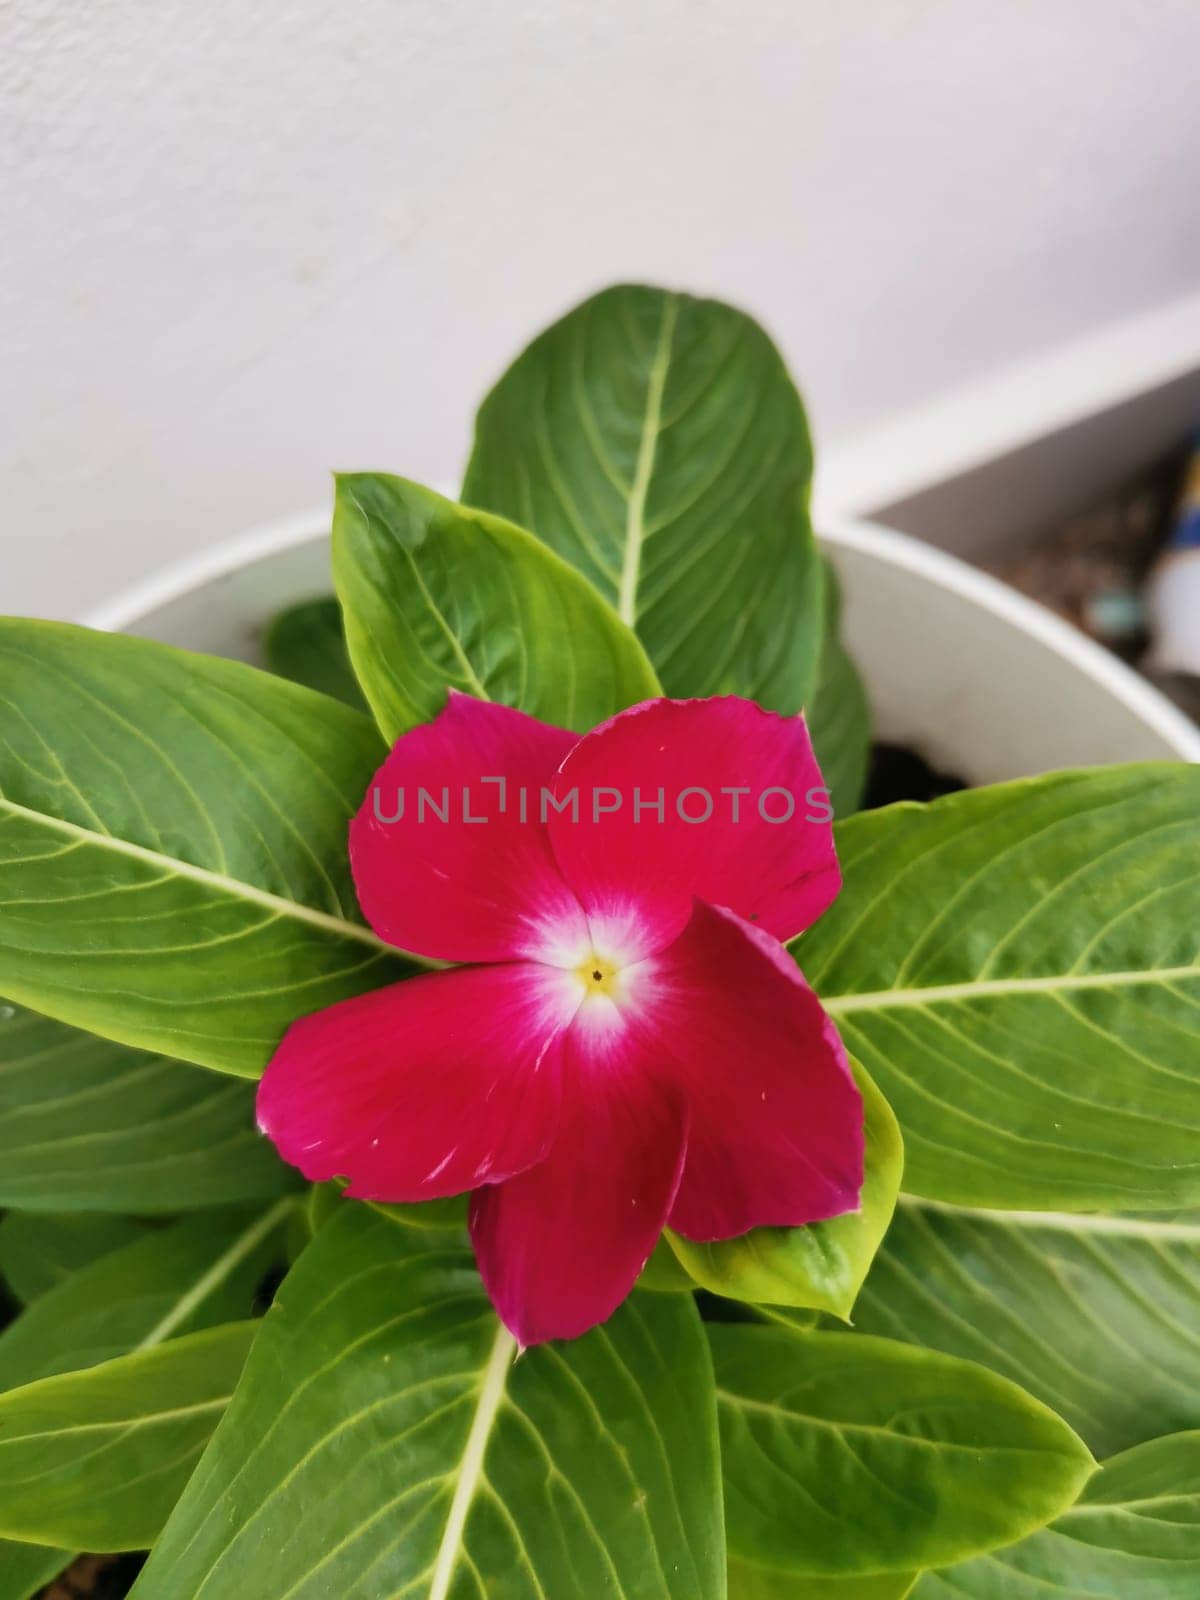 Vinca rosea flowers with green leaves background by Fran71